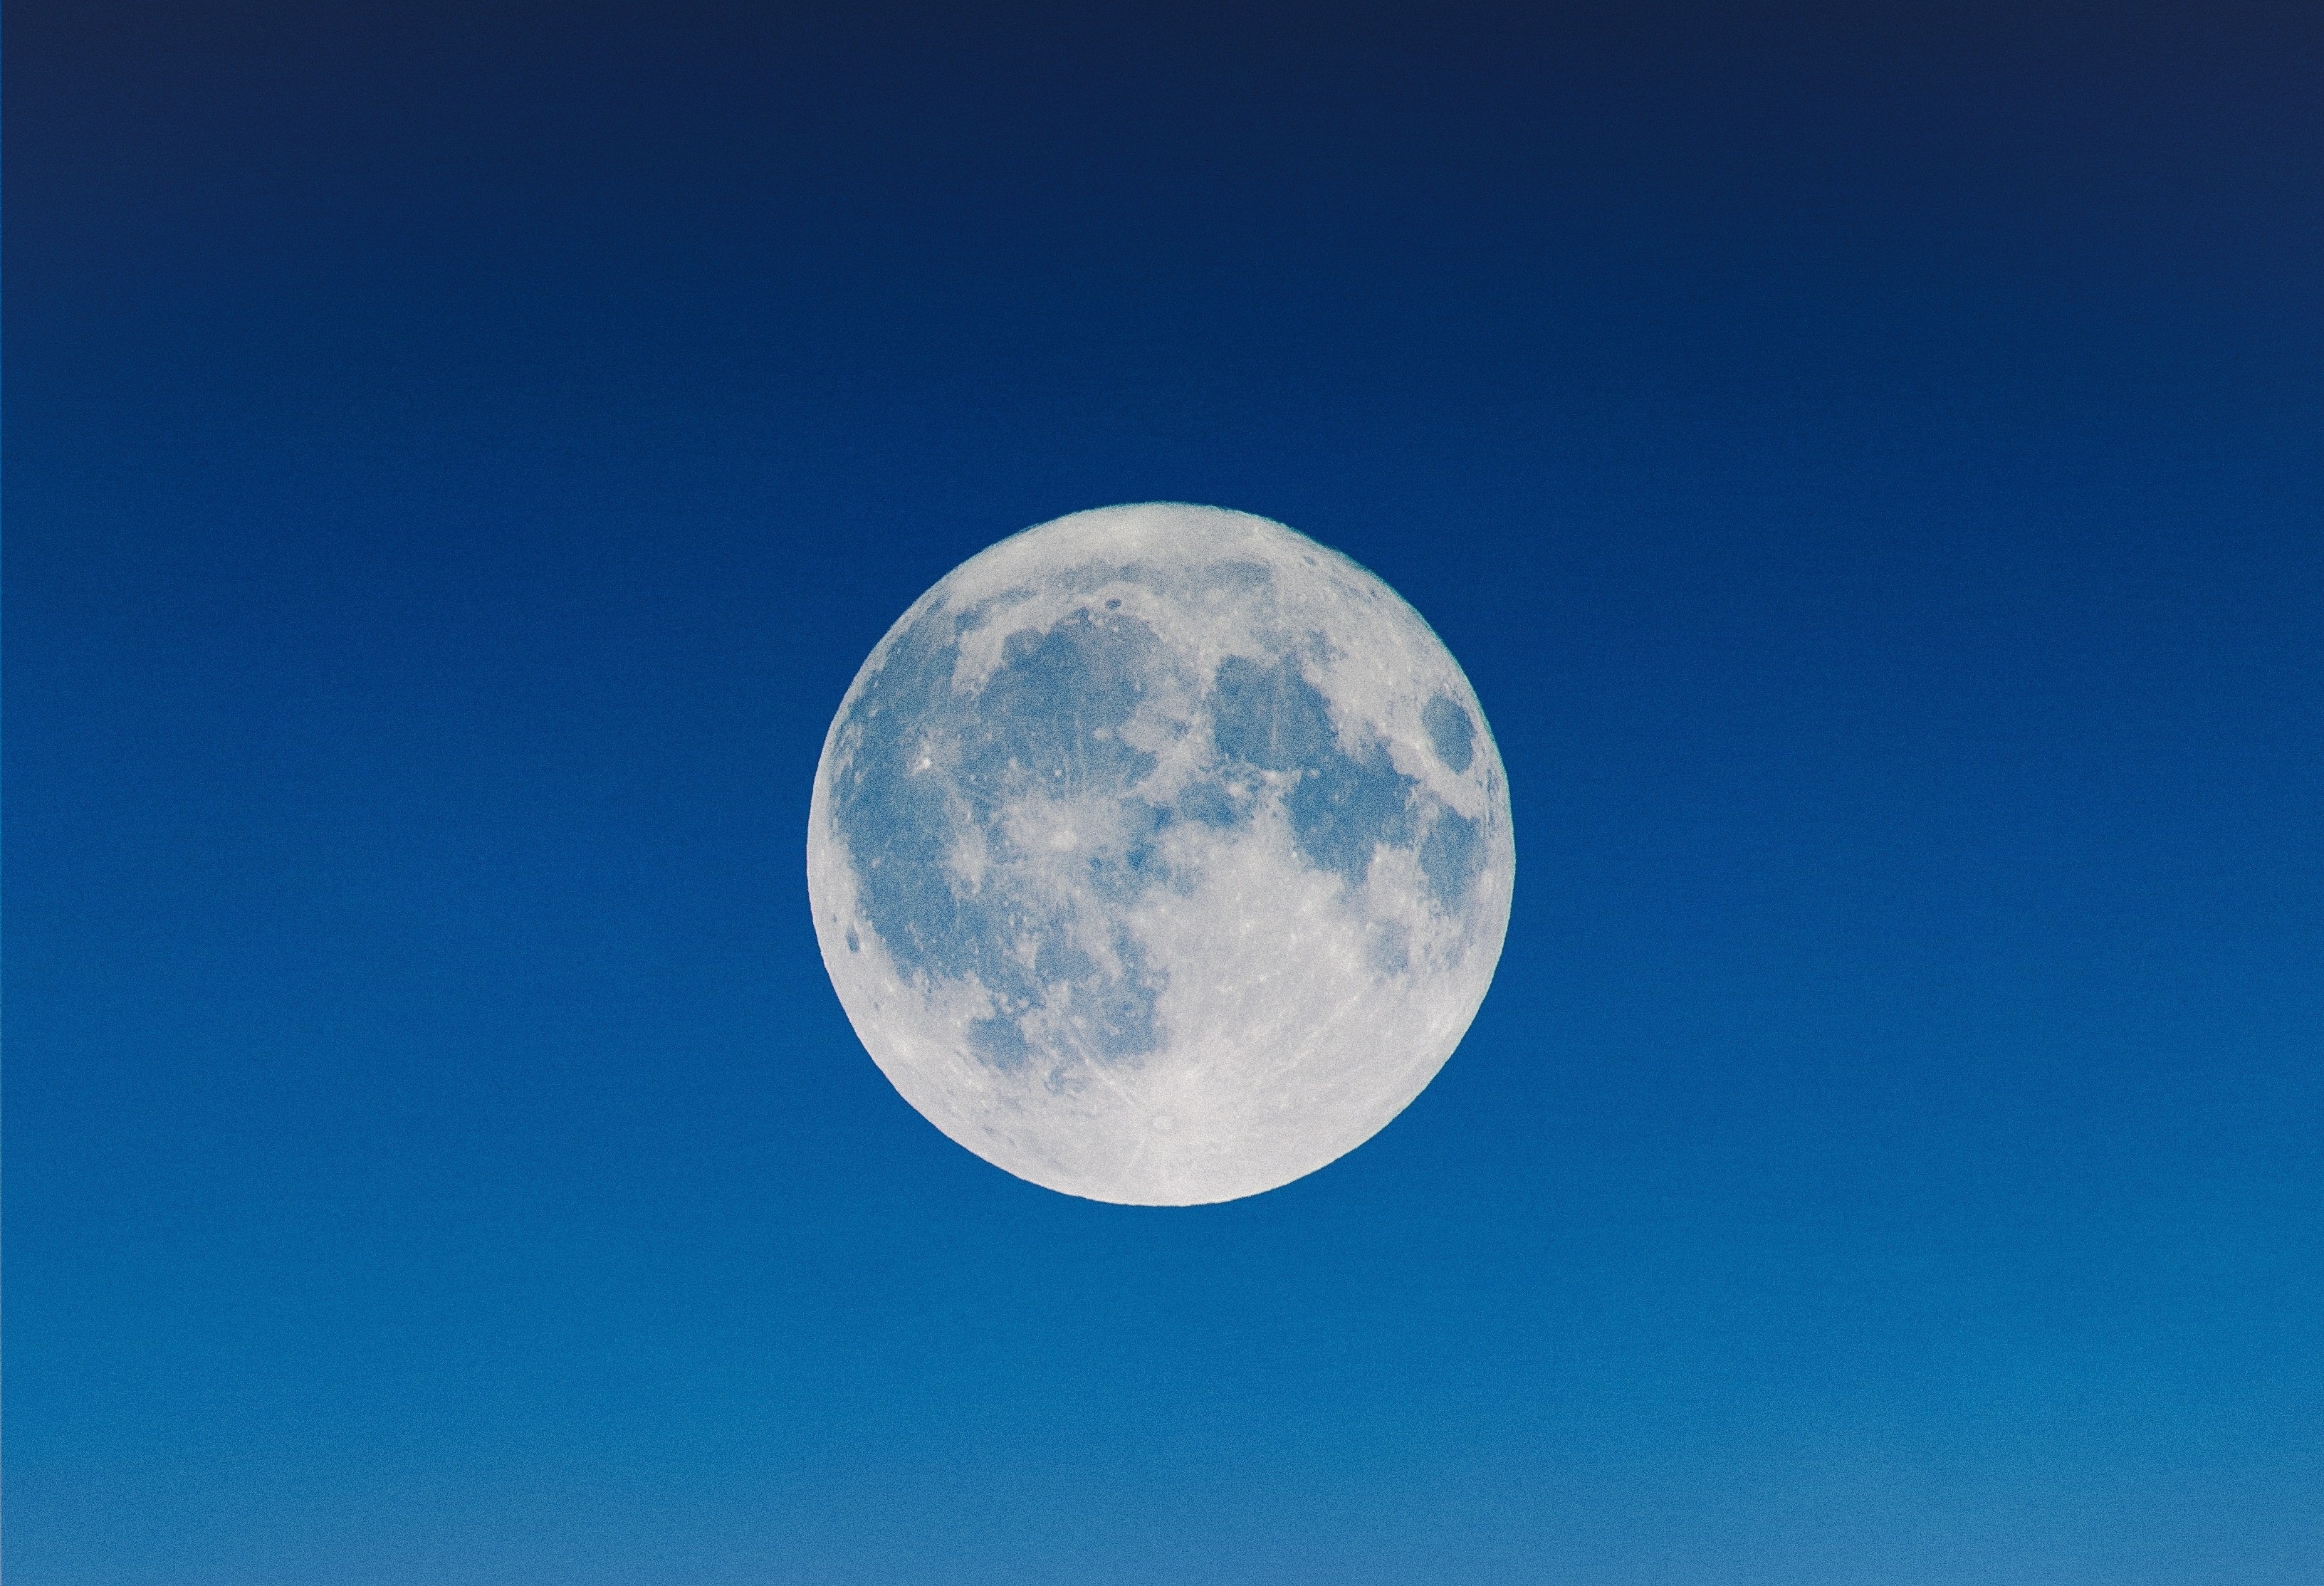 Big White Moon In A Blue Sky Wallpapers And Images Wallpapers Pictures Photos